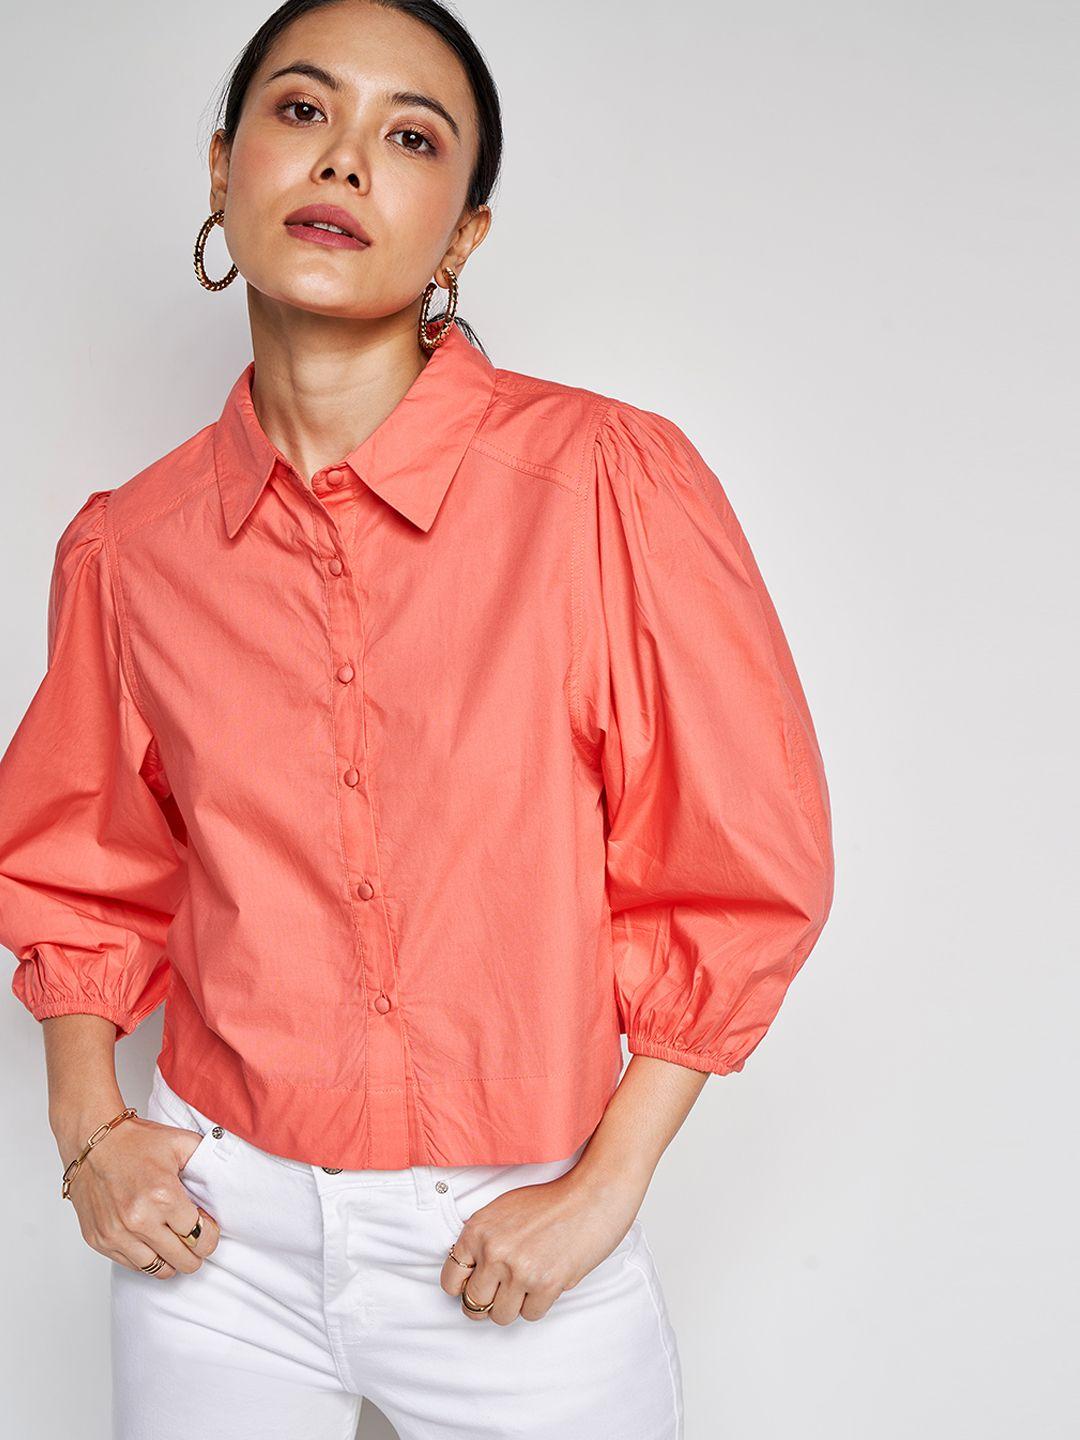 and-shirt-collar-puff-sleeve-cotton-shirt-style-top